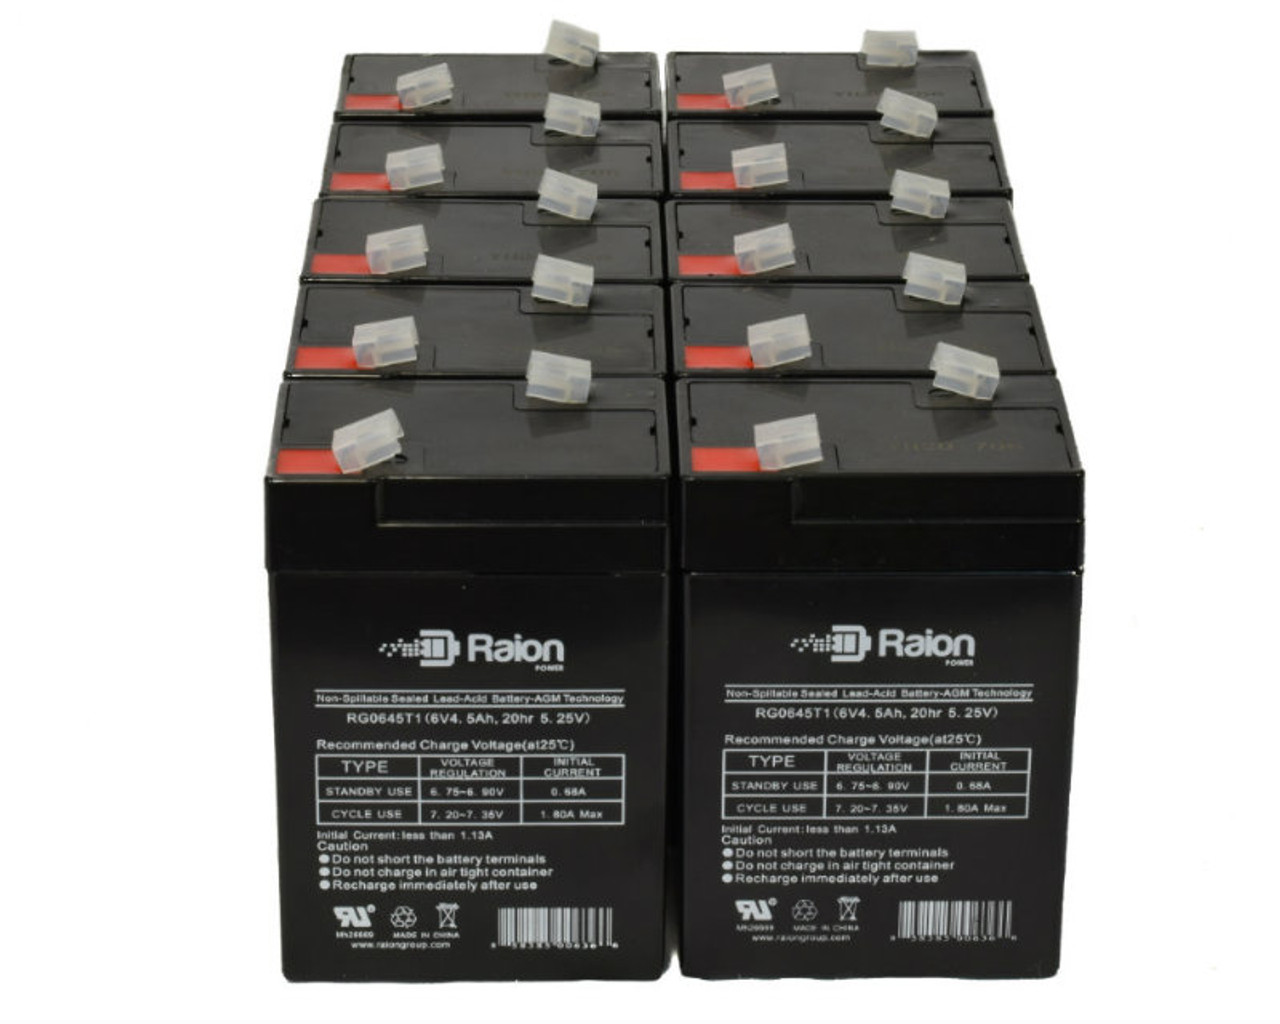 Raion Power 6V 4.5Ah Replacement Emergency Light Battery for Power Rite PRB64 - 10 Pack